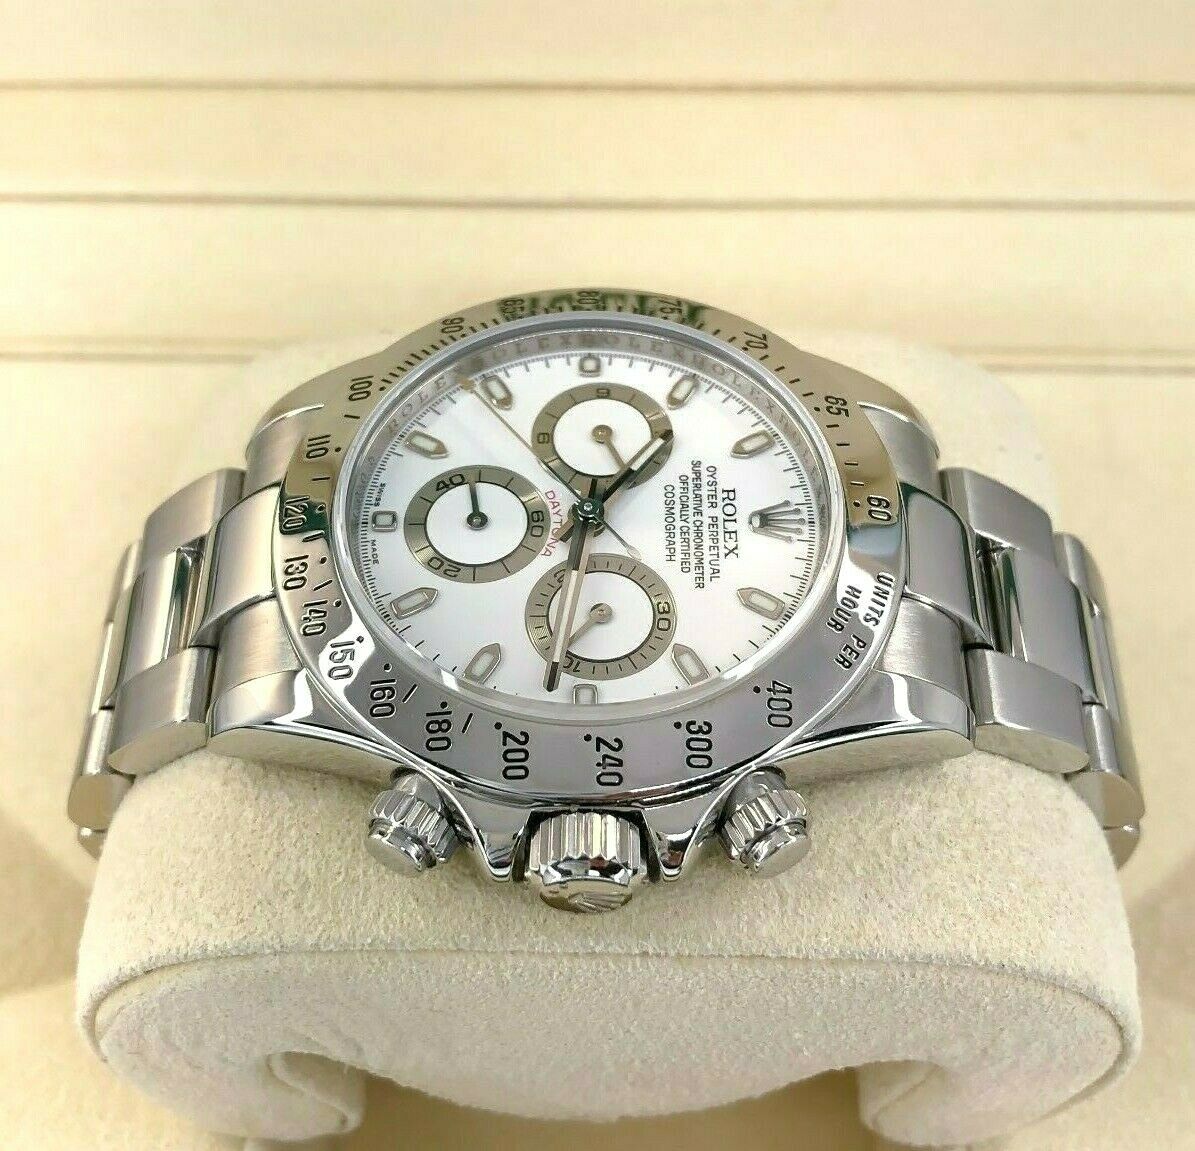 Rolex Cosmograph Daytona 40mm Stainless Steel Watch Ref 116520 Box & Papers